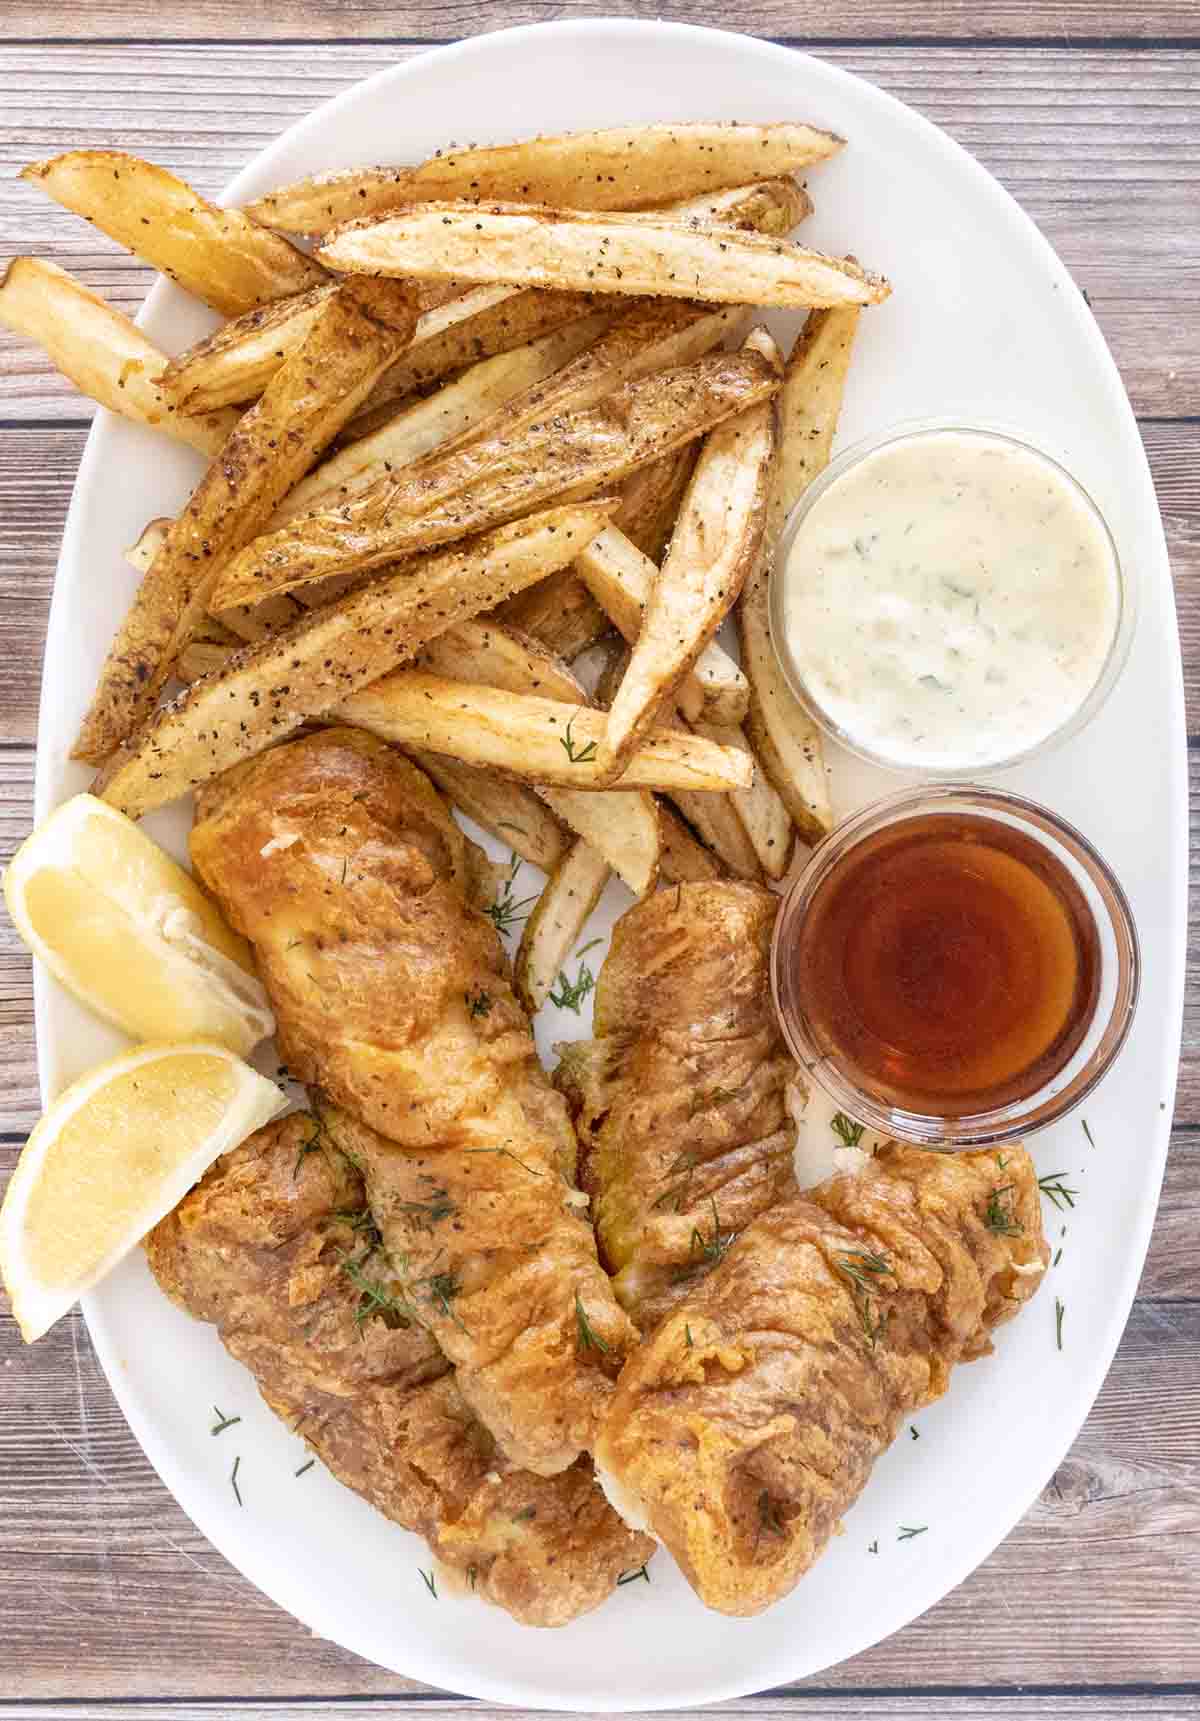 Fish and chips on a white platter with malt vinegar and tarter sauce.